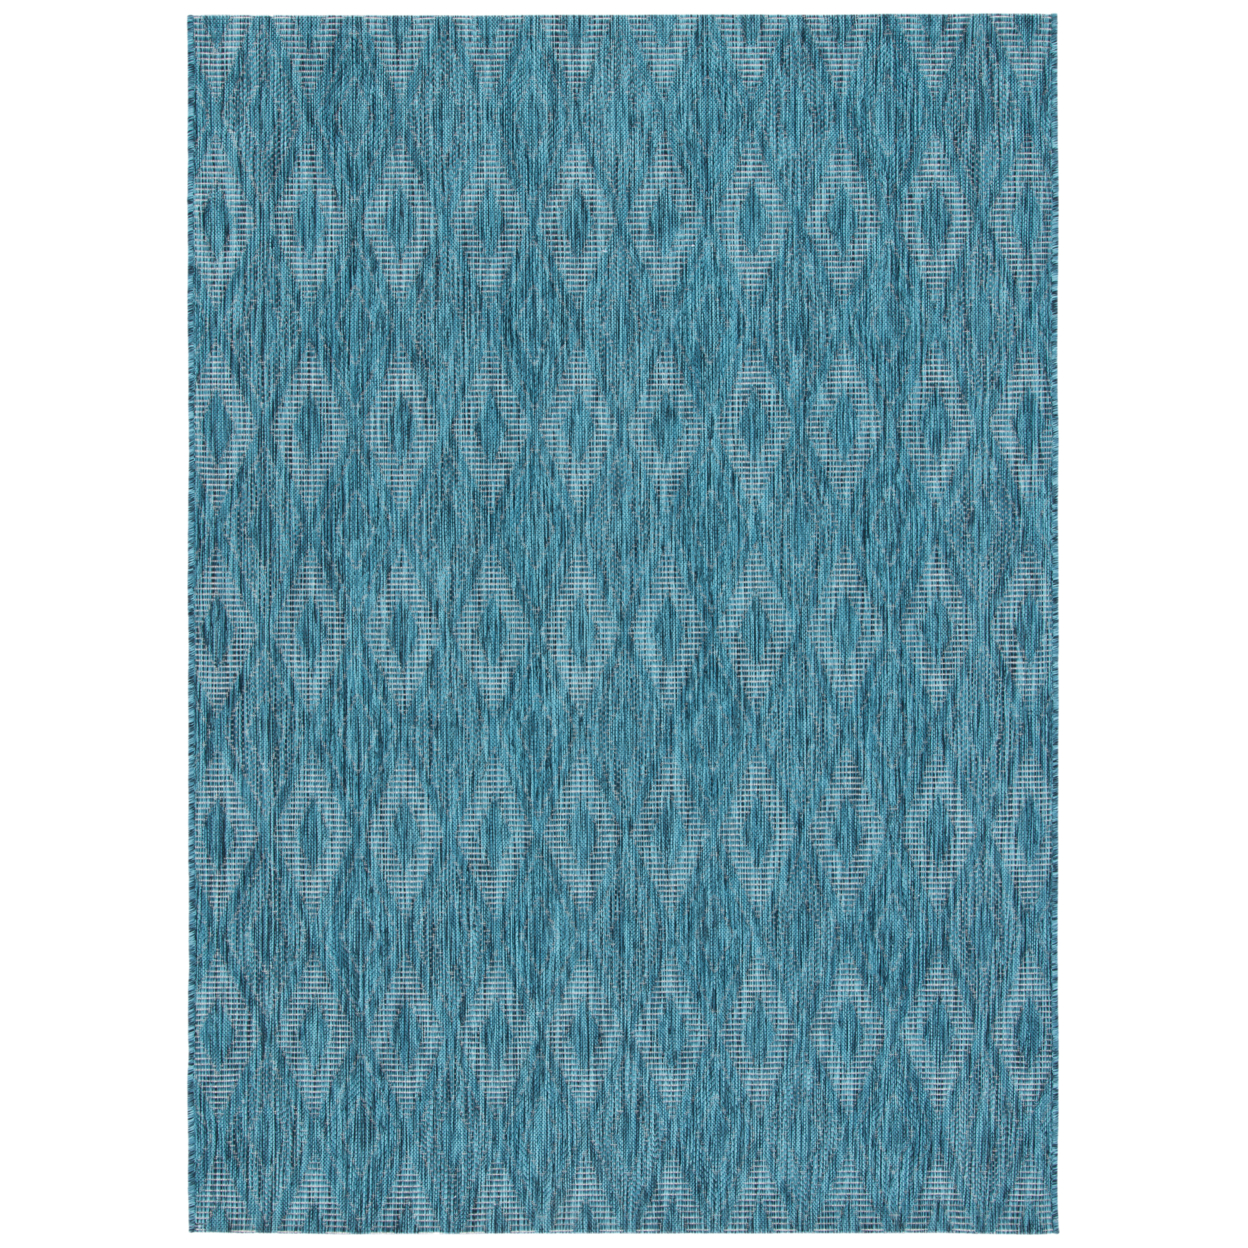 SAFAVIEH Outdoor CY8522-37222 Courtyard Turquoise / Blue Rug - 9' X 12'